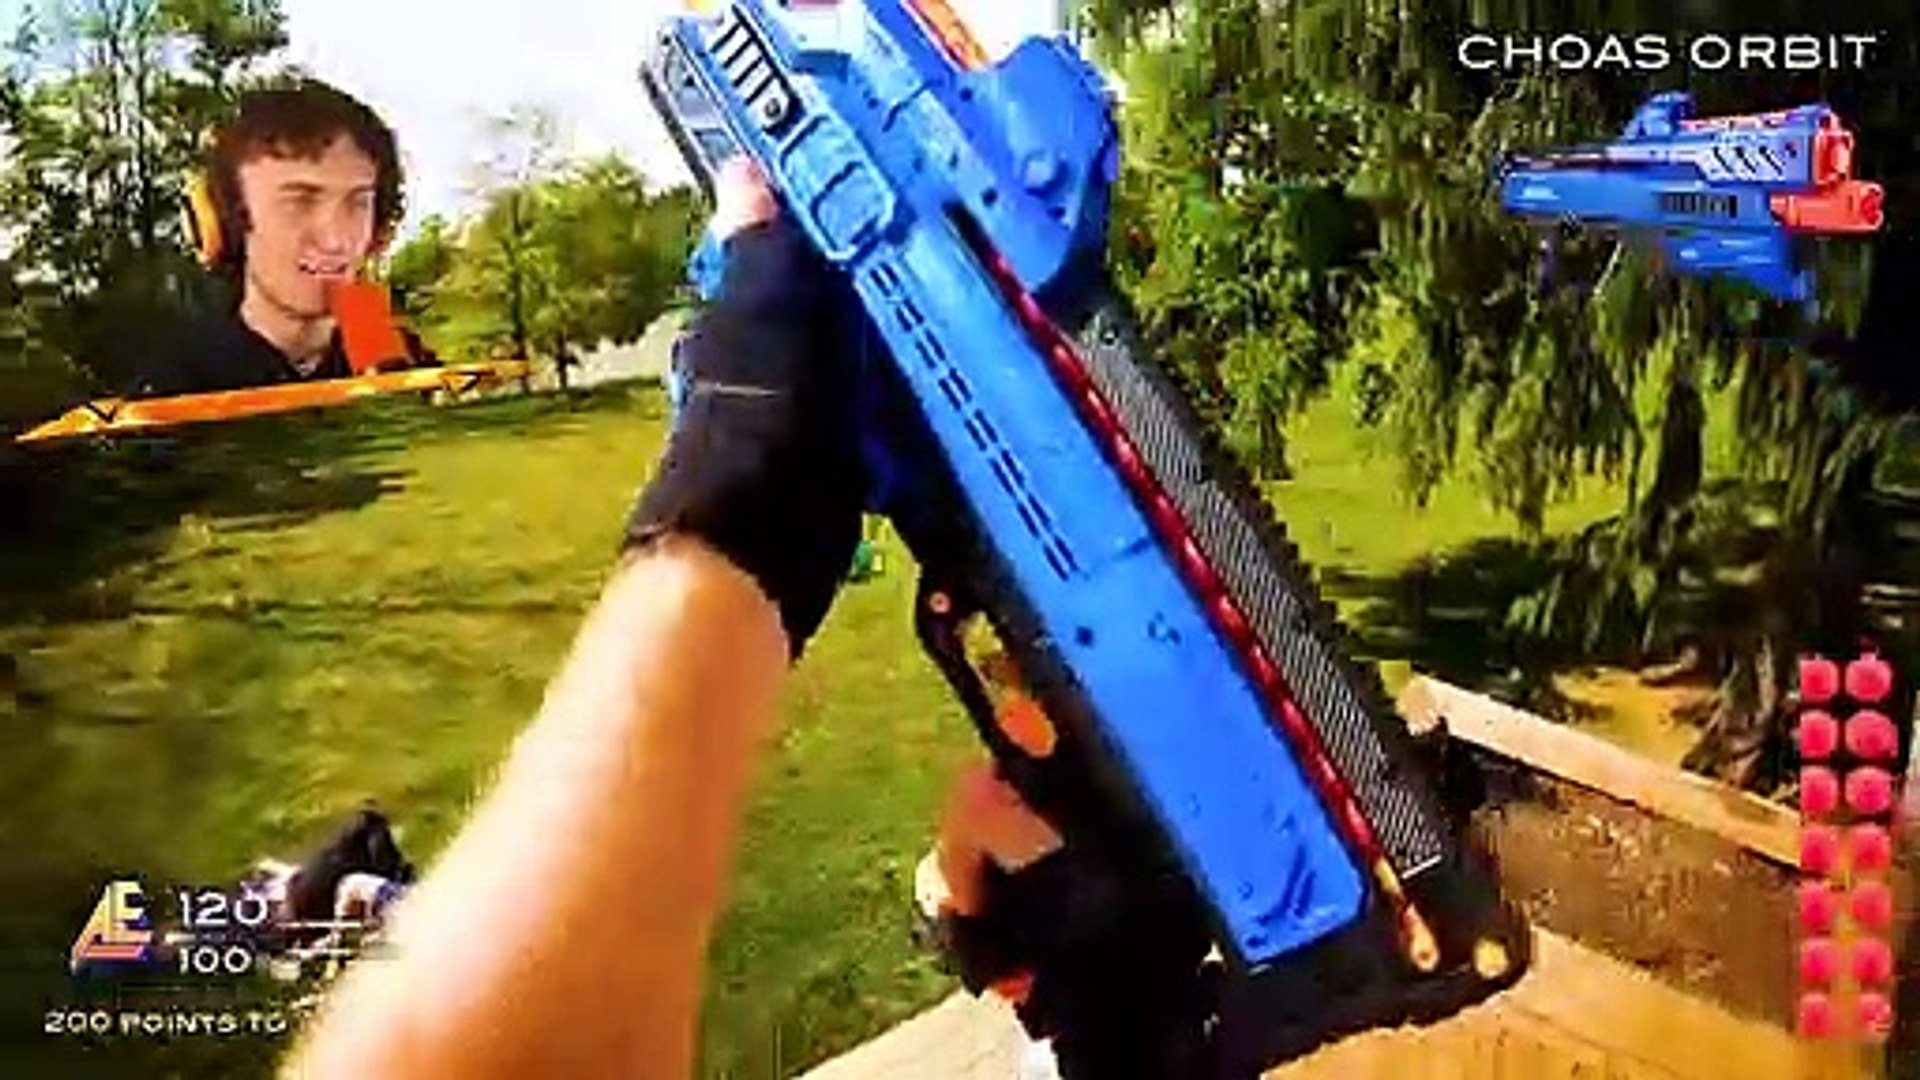 The MOST INSANE NERF GUN GAME Fight In The WORLD! - Vidéo Dailymotion